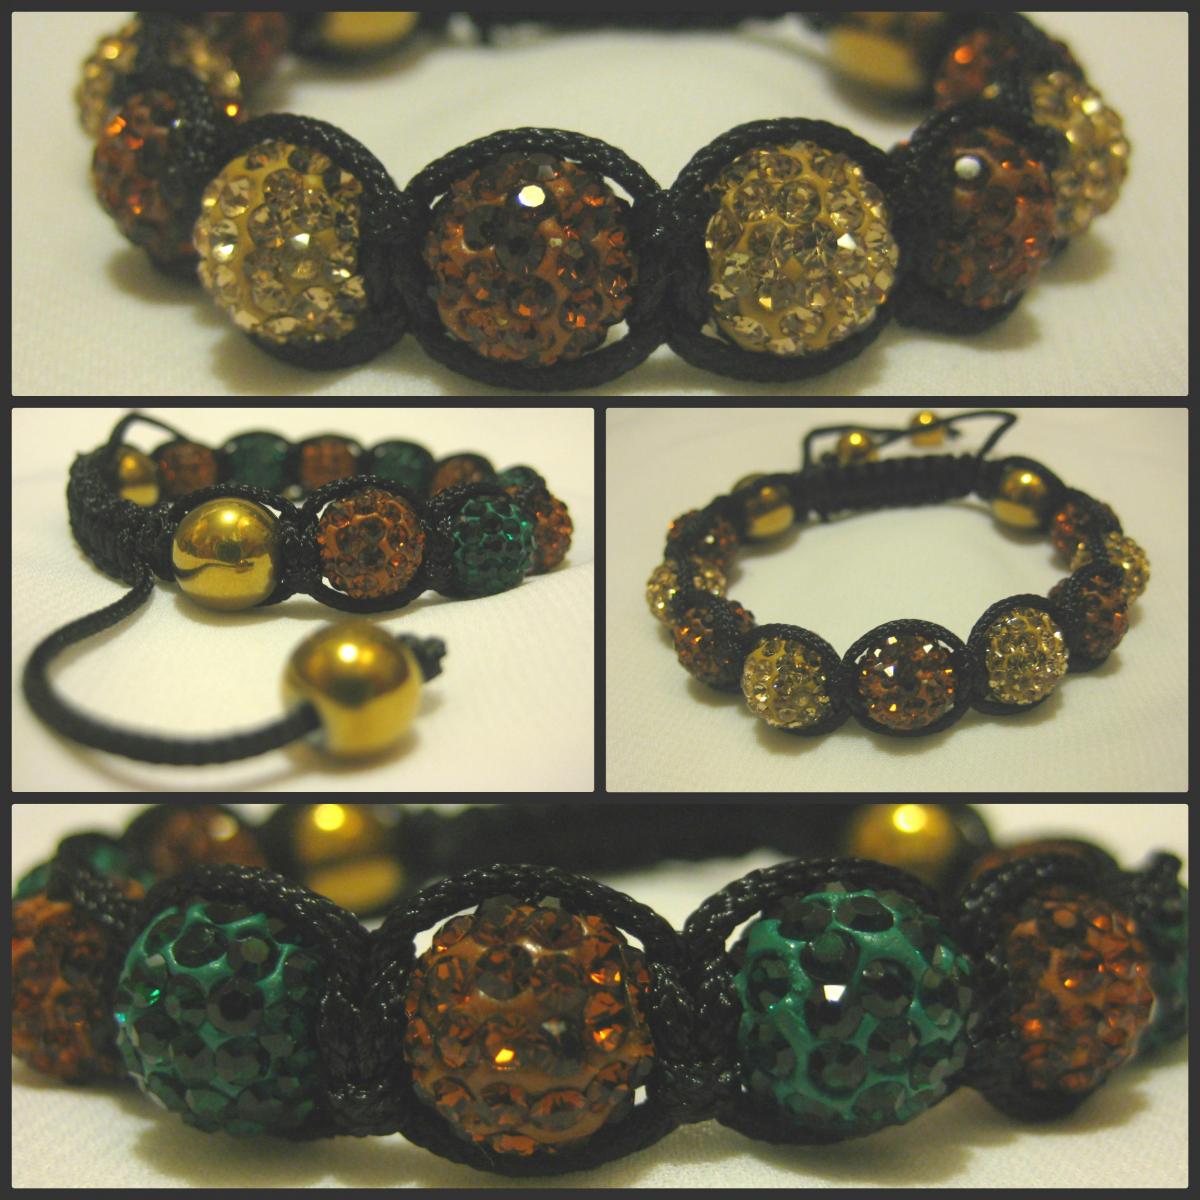 Two-tone Gold Haematite Range Emerald Green Or Champagne And Bronze Brown Crystal Pave Bead With Gold Haematite Macrame Friendship Bracelet